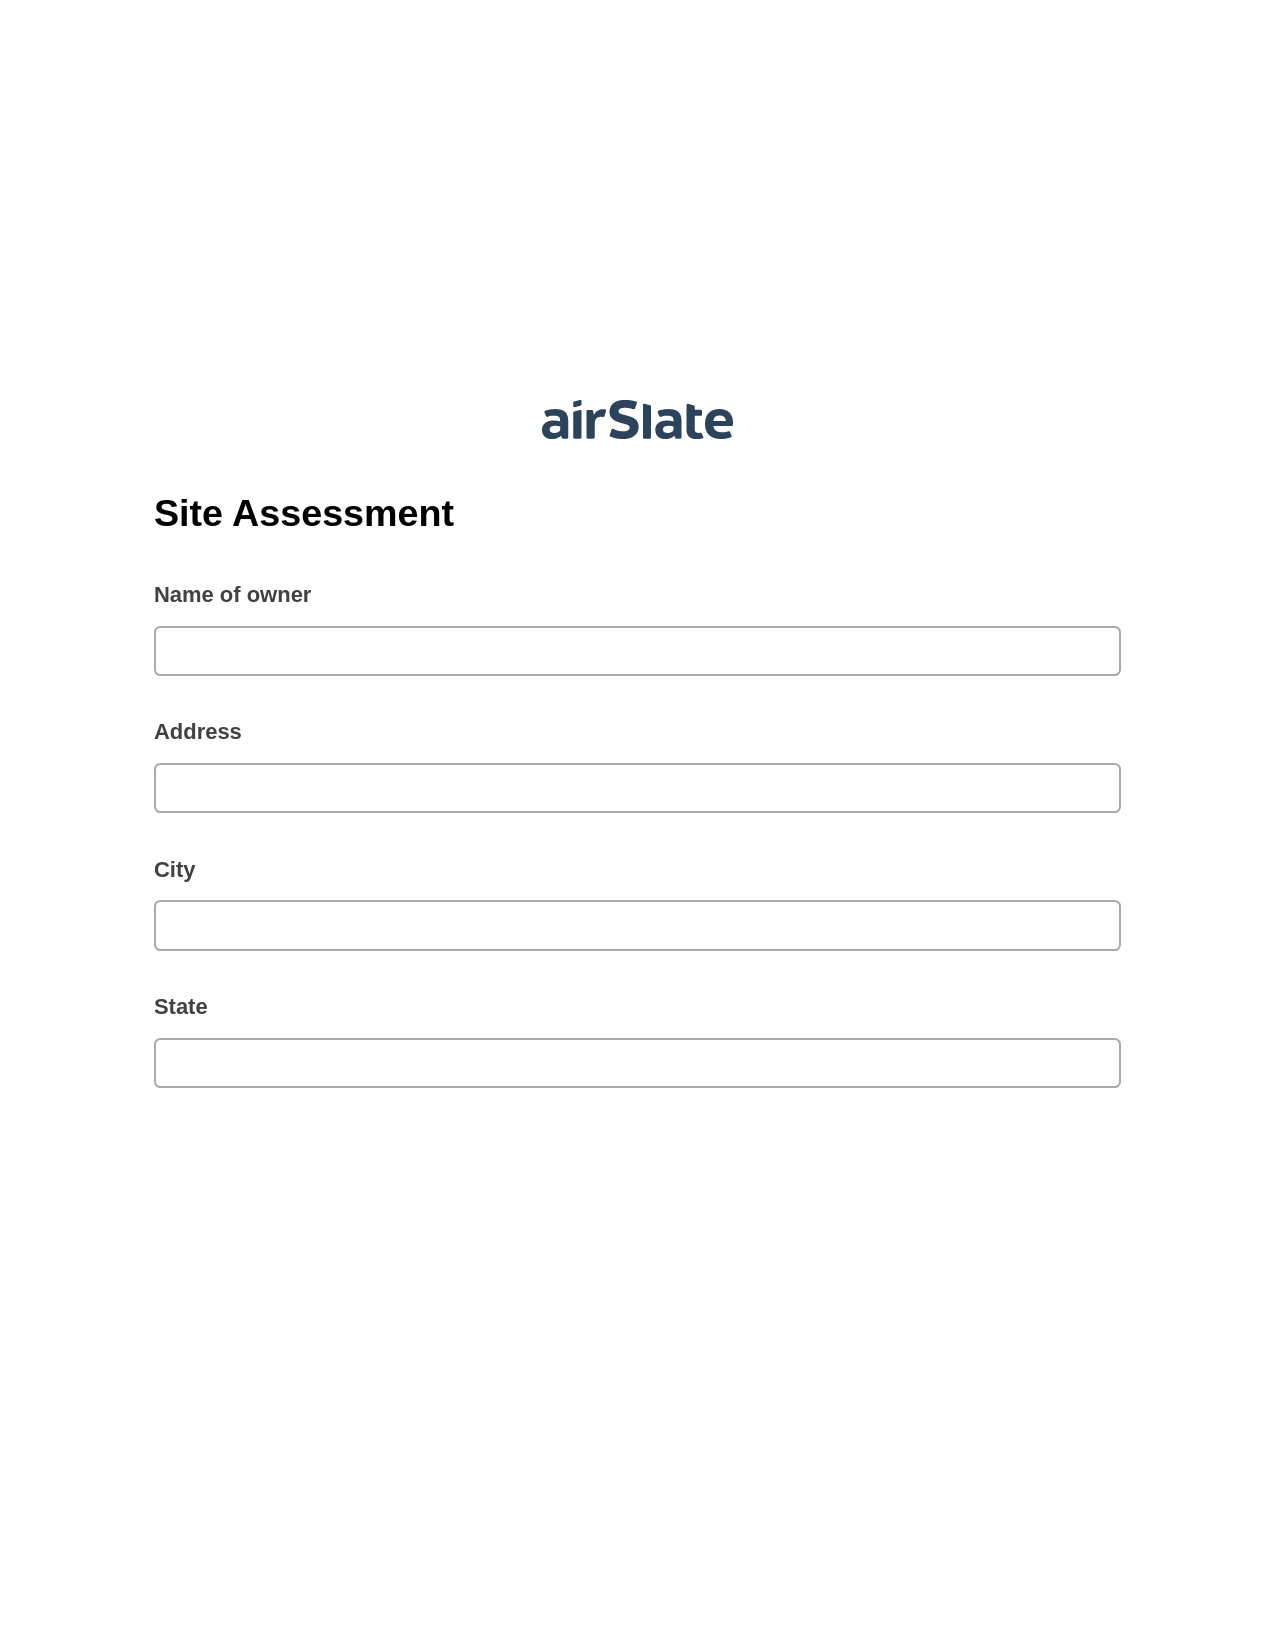 Site Assessment Pre-fill from Excel Spreadsheet Dropdown Options Bot, Document Hide Bot, Google Drive Bot